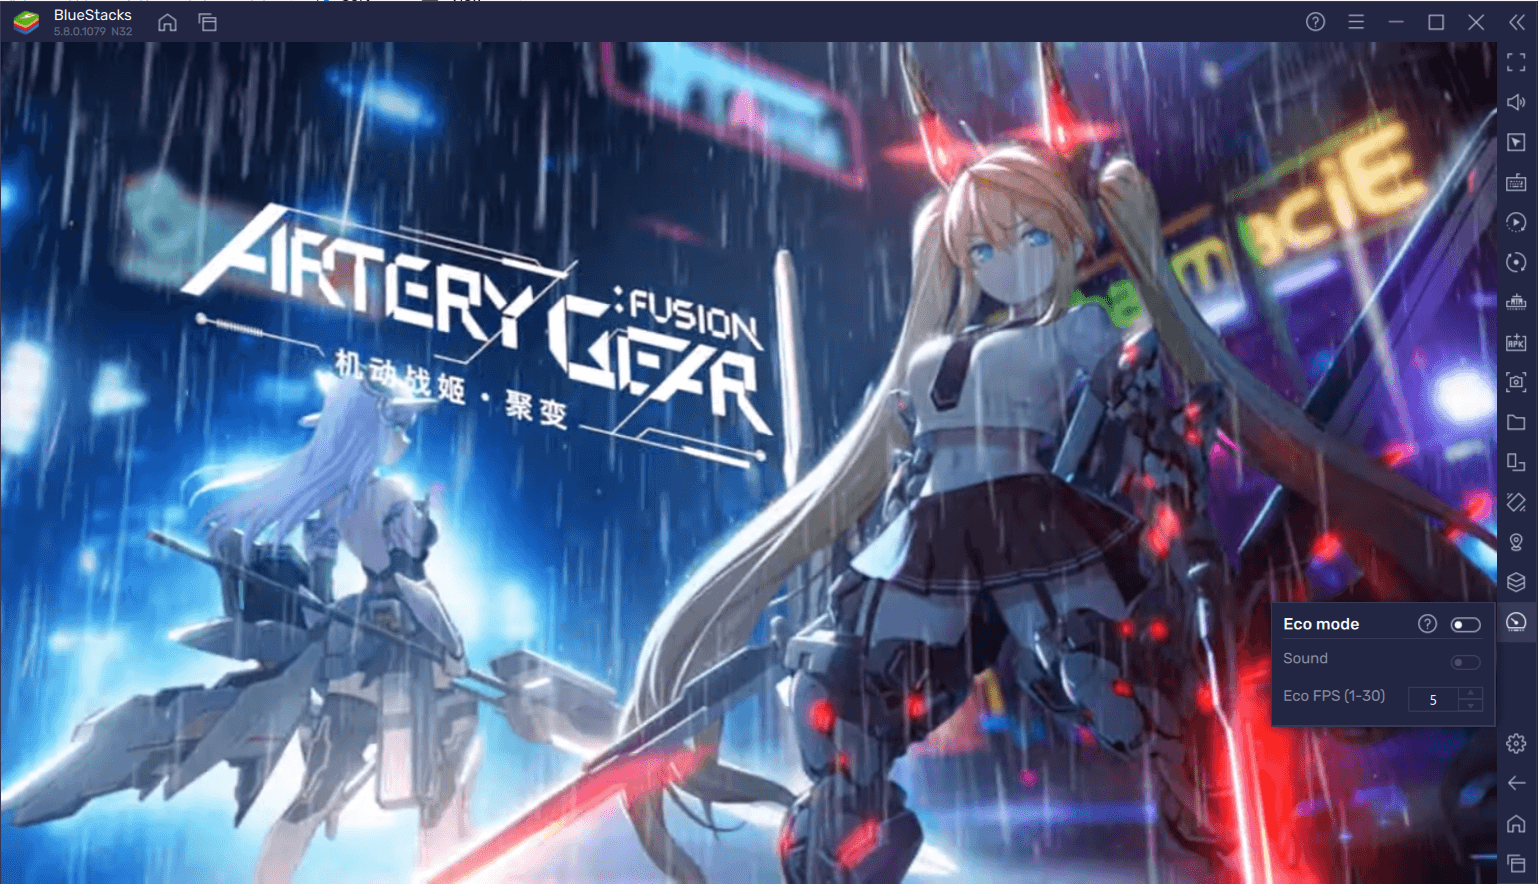 Artery Gear: Fusion – Use these BlueStacks Features to Advance Efficiently and Save Time